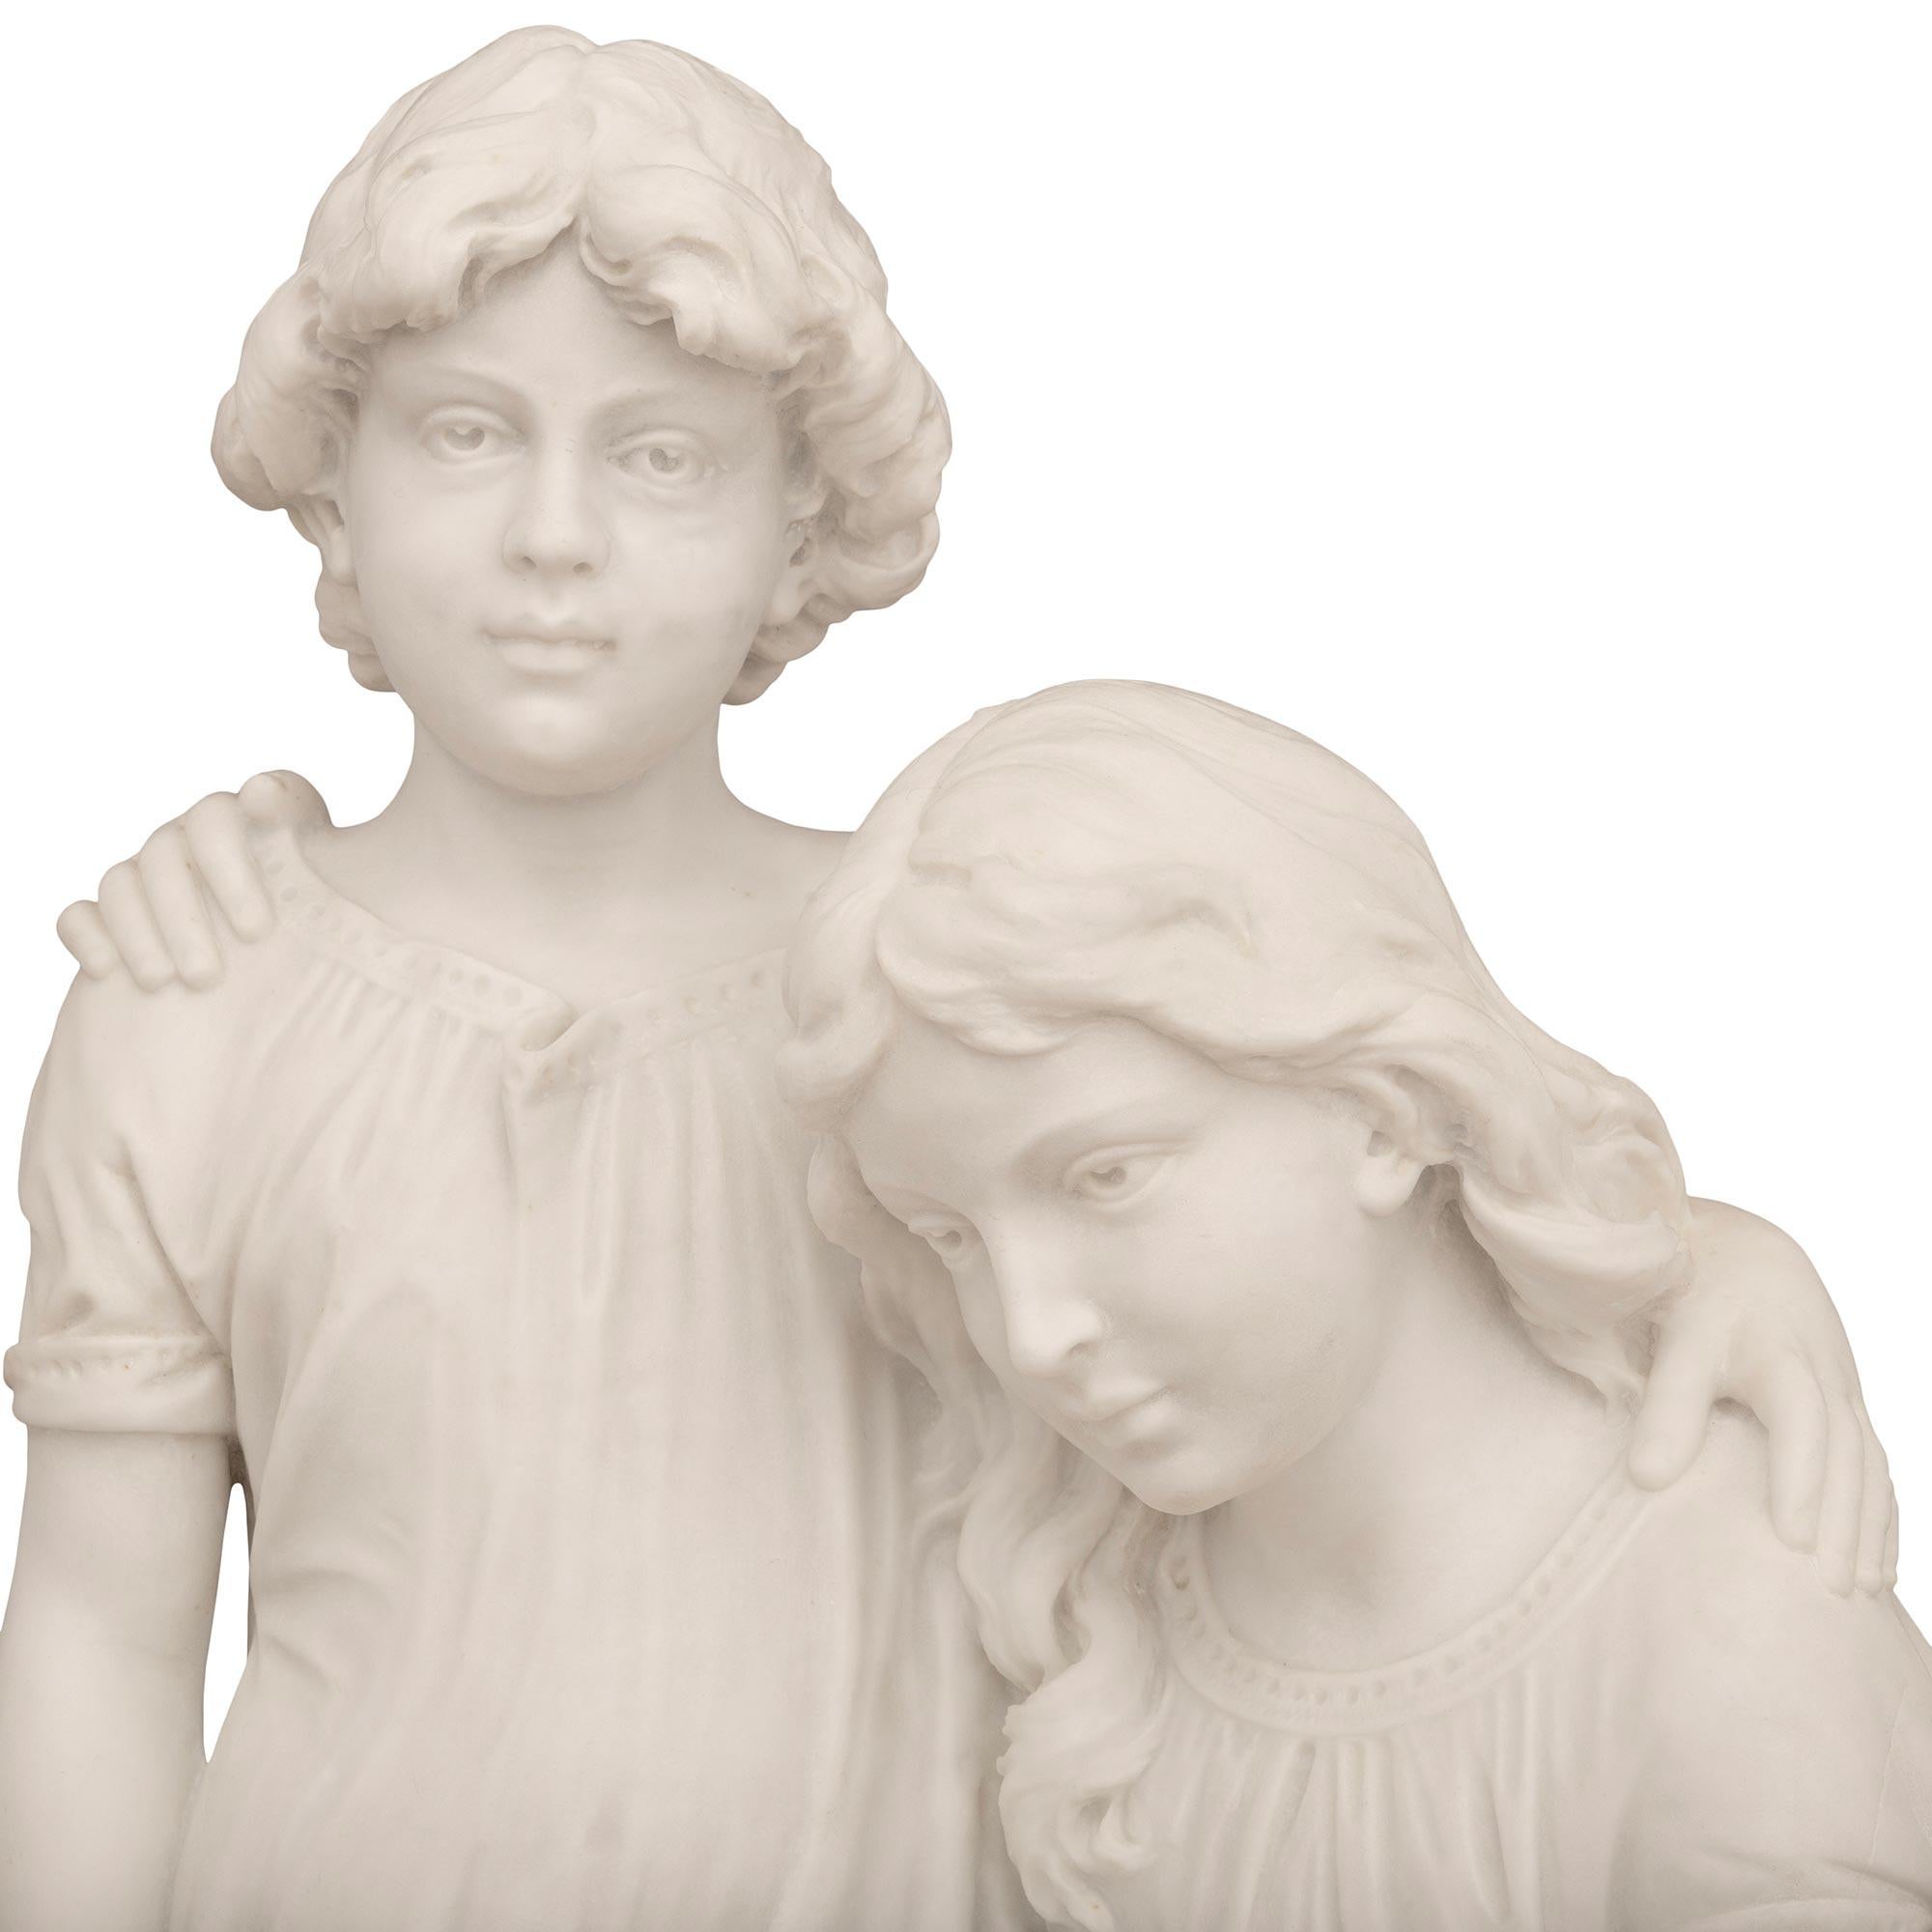 A charming Italian 19th century white Carrara marble statue of a brother and sister at the seashore. The sister is seated on a rock while dressed in a long dress and holding a large seashell on her lap. The standing brother is looking ahead while